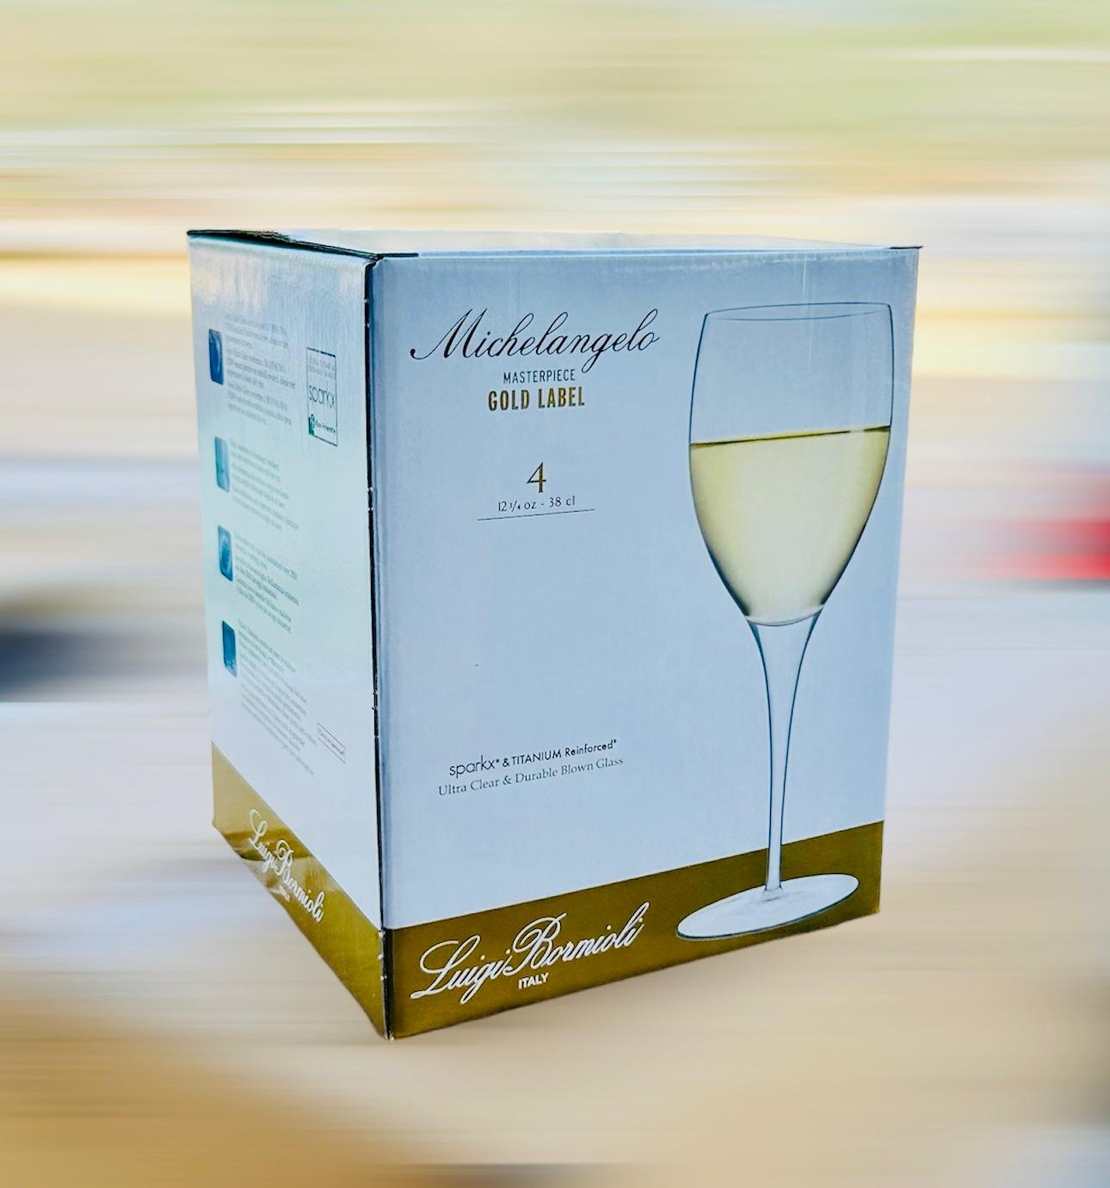 MICHEL.MASTERP.GOLD LABEL RIESLING 380ML